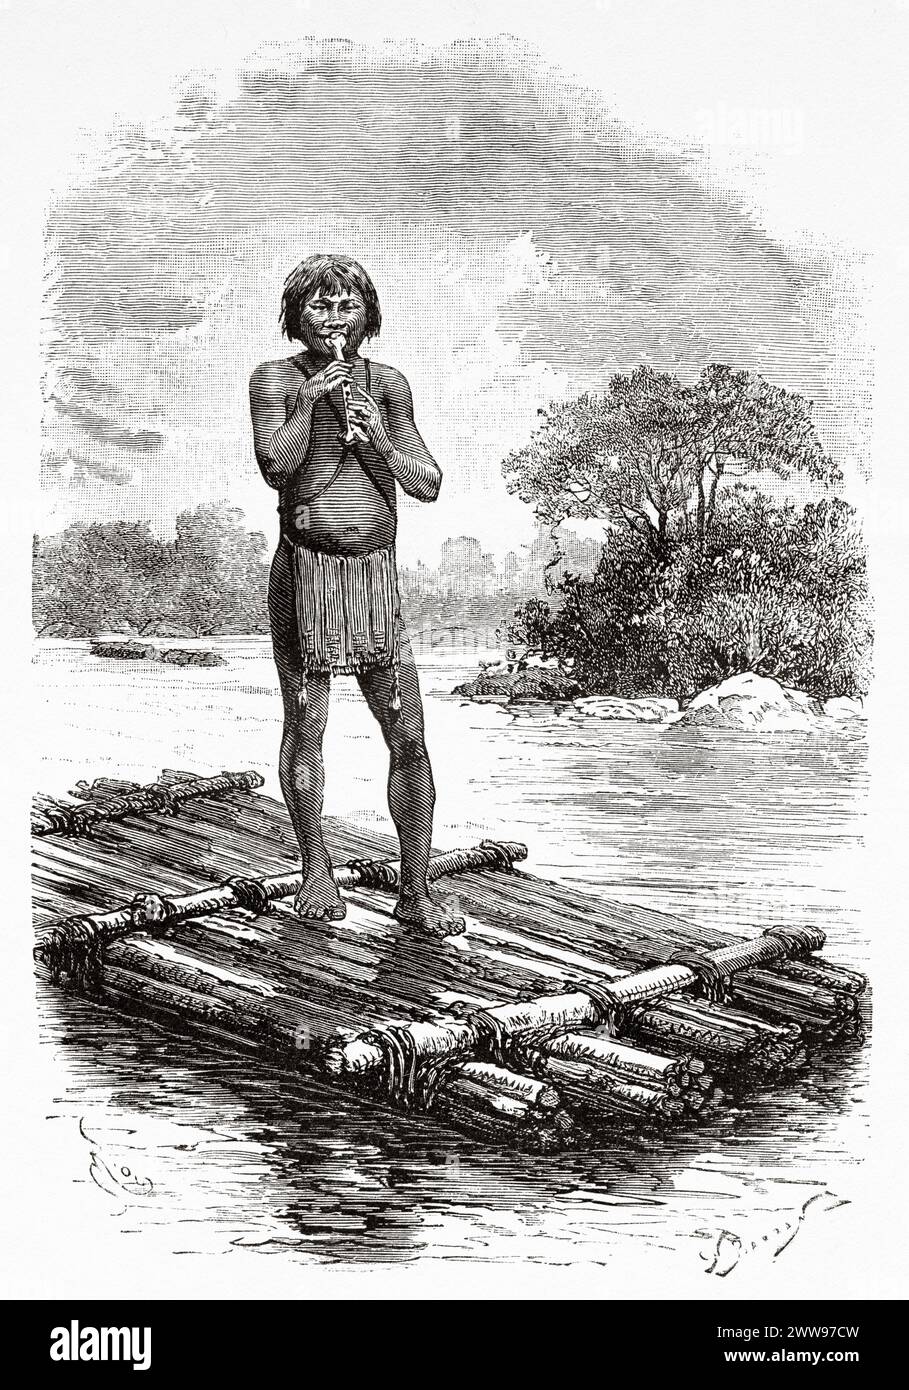 Native playing a flute on a raft, French Guiana, South America. Drawing by Edouard Riou (1833 - 1900) From Cayenne to the Andes (1878-1879) by Jules Crevaux (1847 - 1882) Le Tour du Monde 1880 Stock Photo